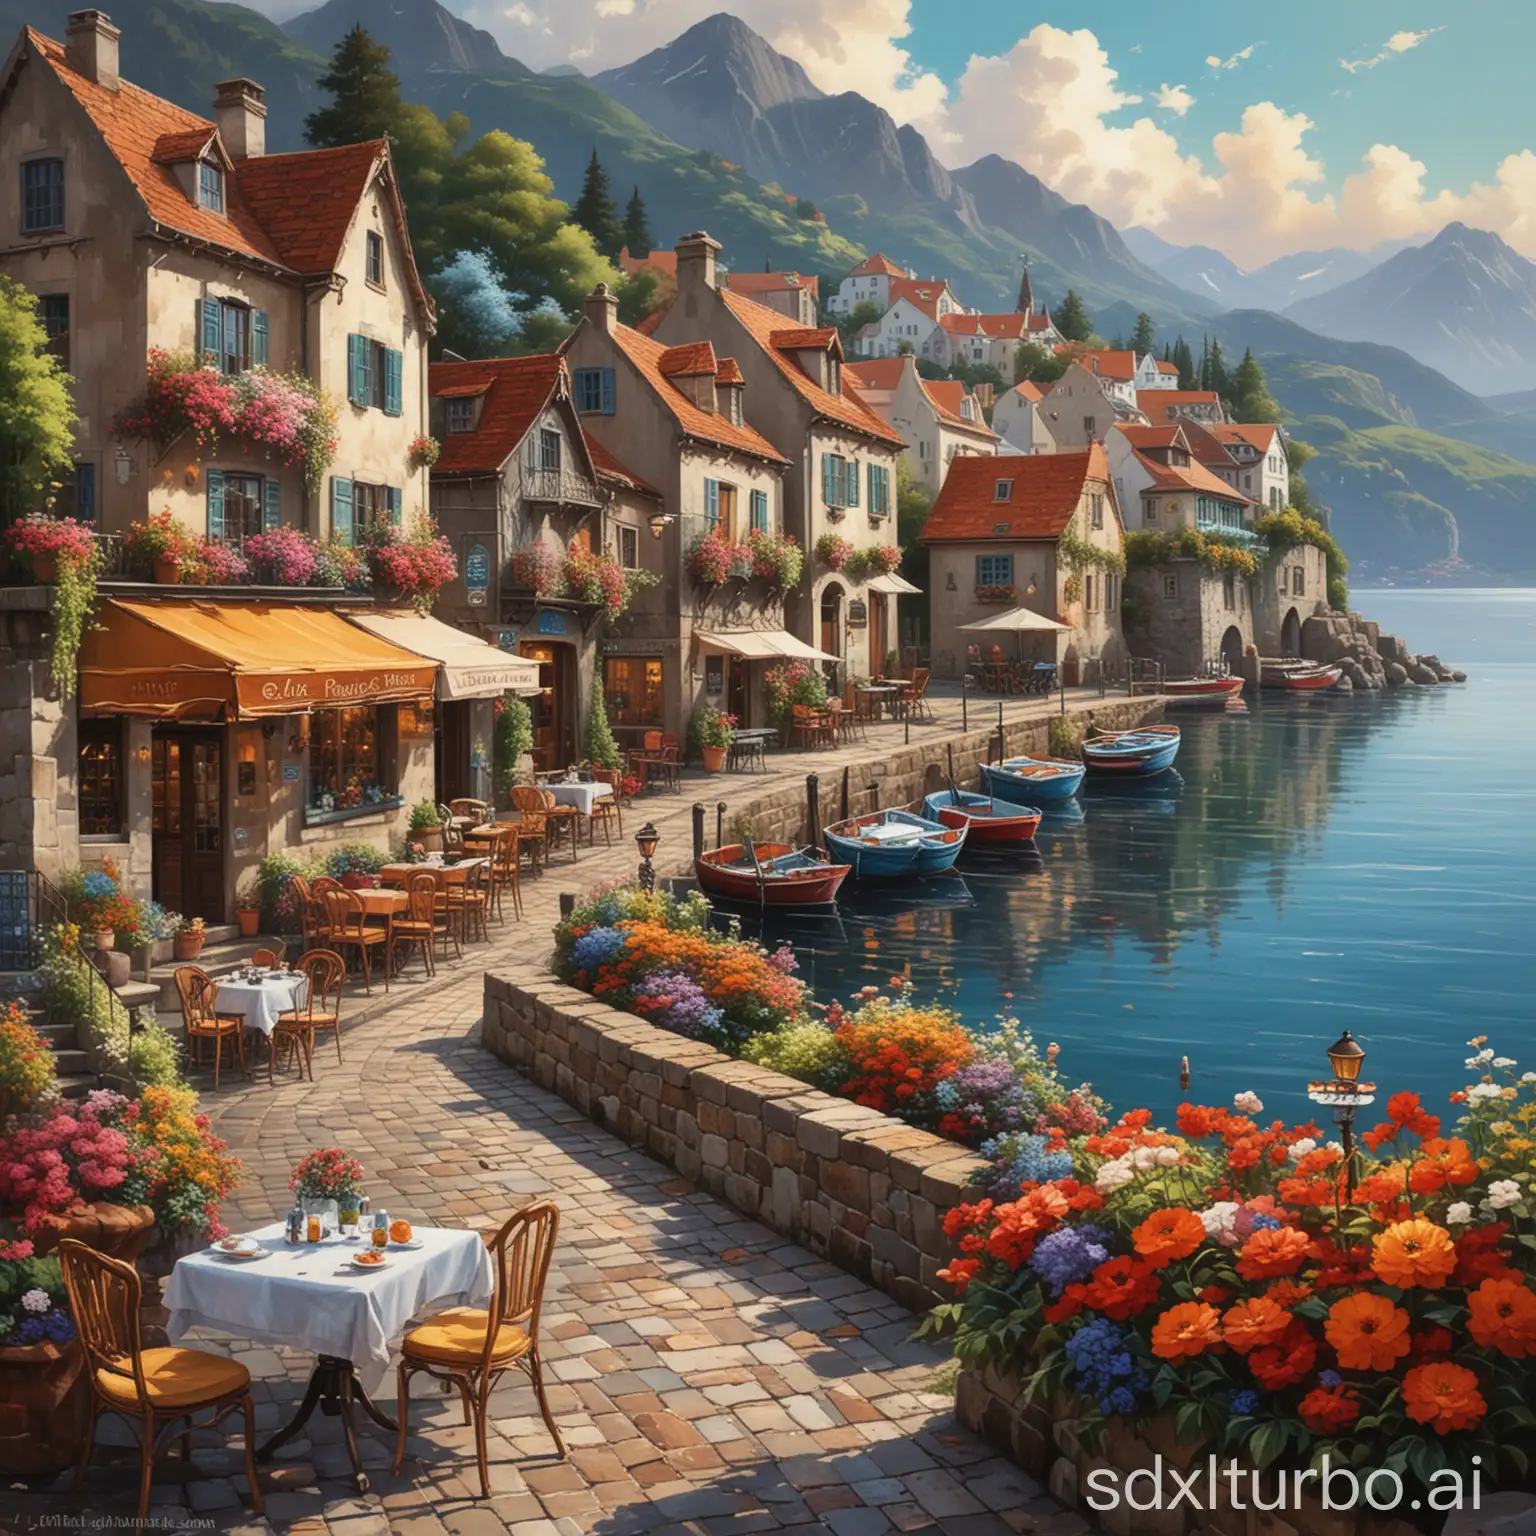 Charming-Coastal-Townscape-with-Vibrant-Cafe-and-Serene-Lakeside-View